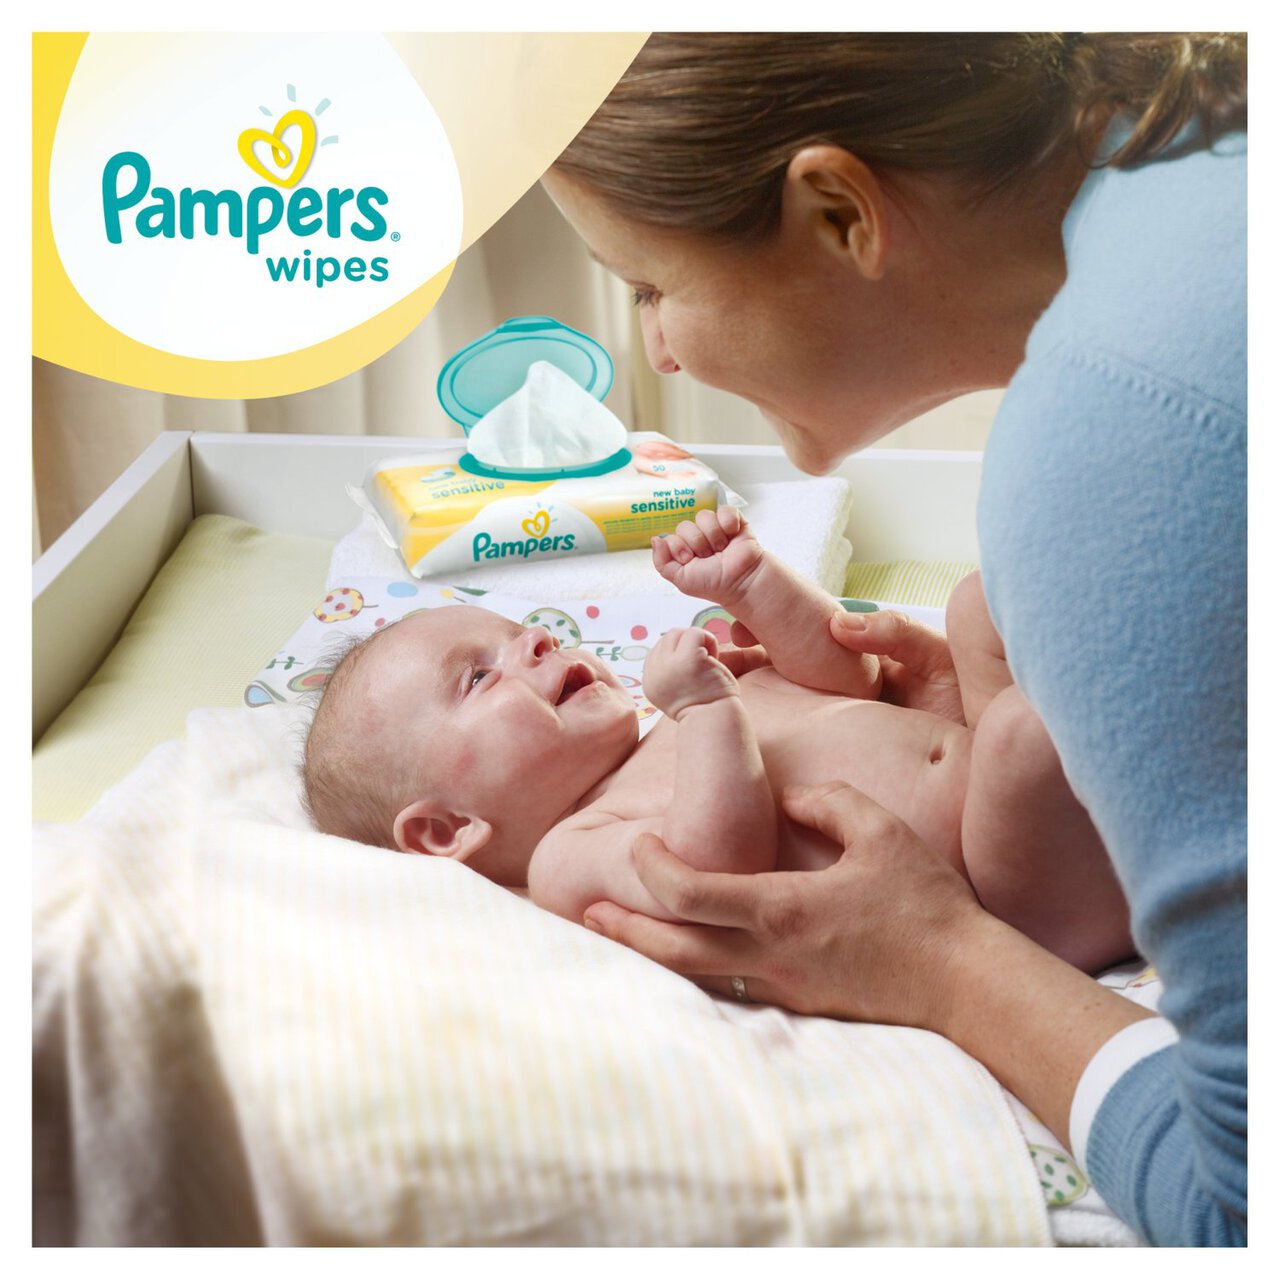 Pampers New Baby Sensitive 50 Baby Wipes 50 per pack